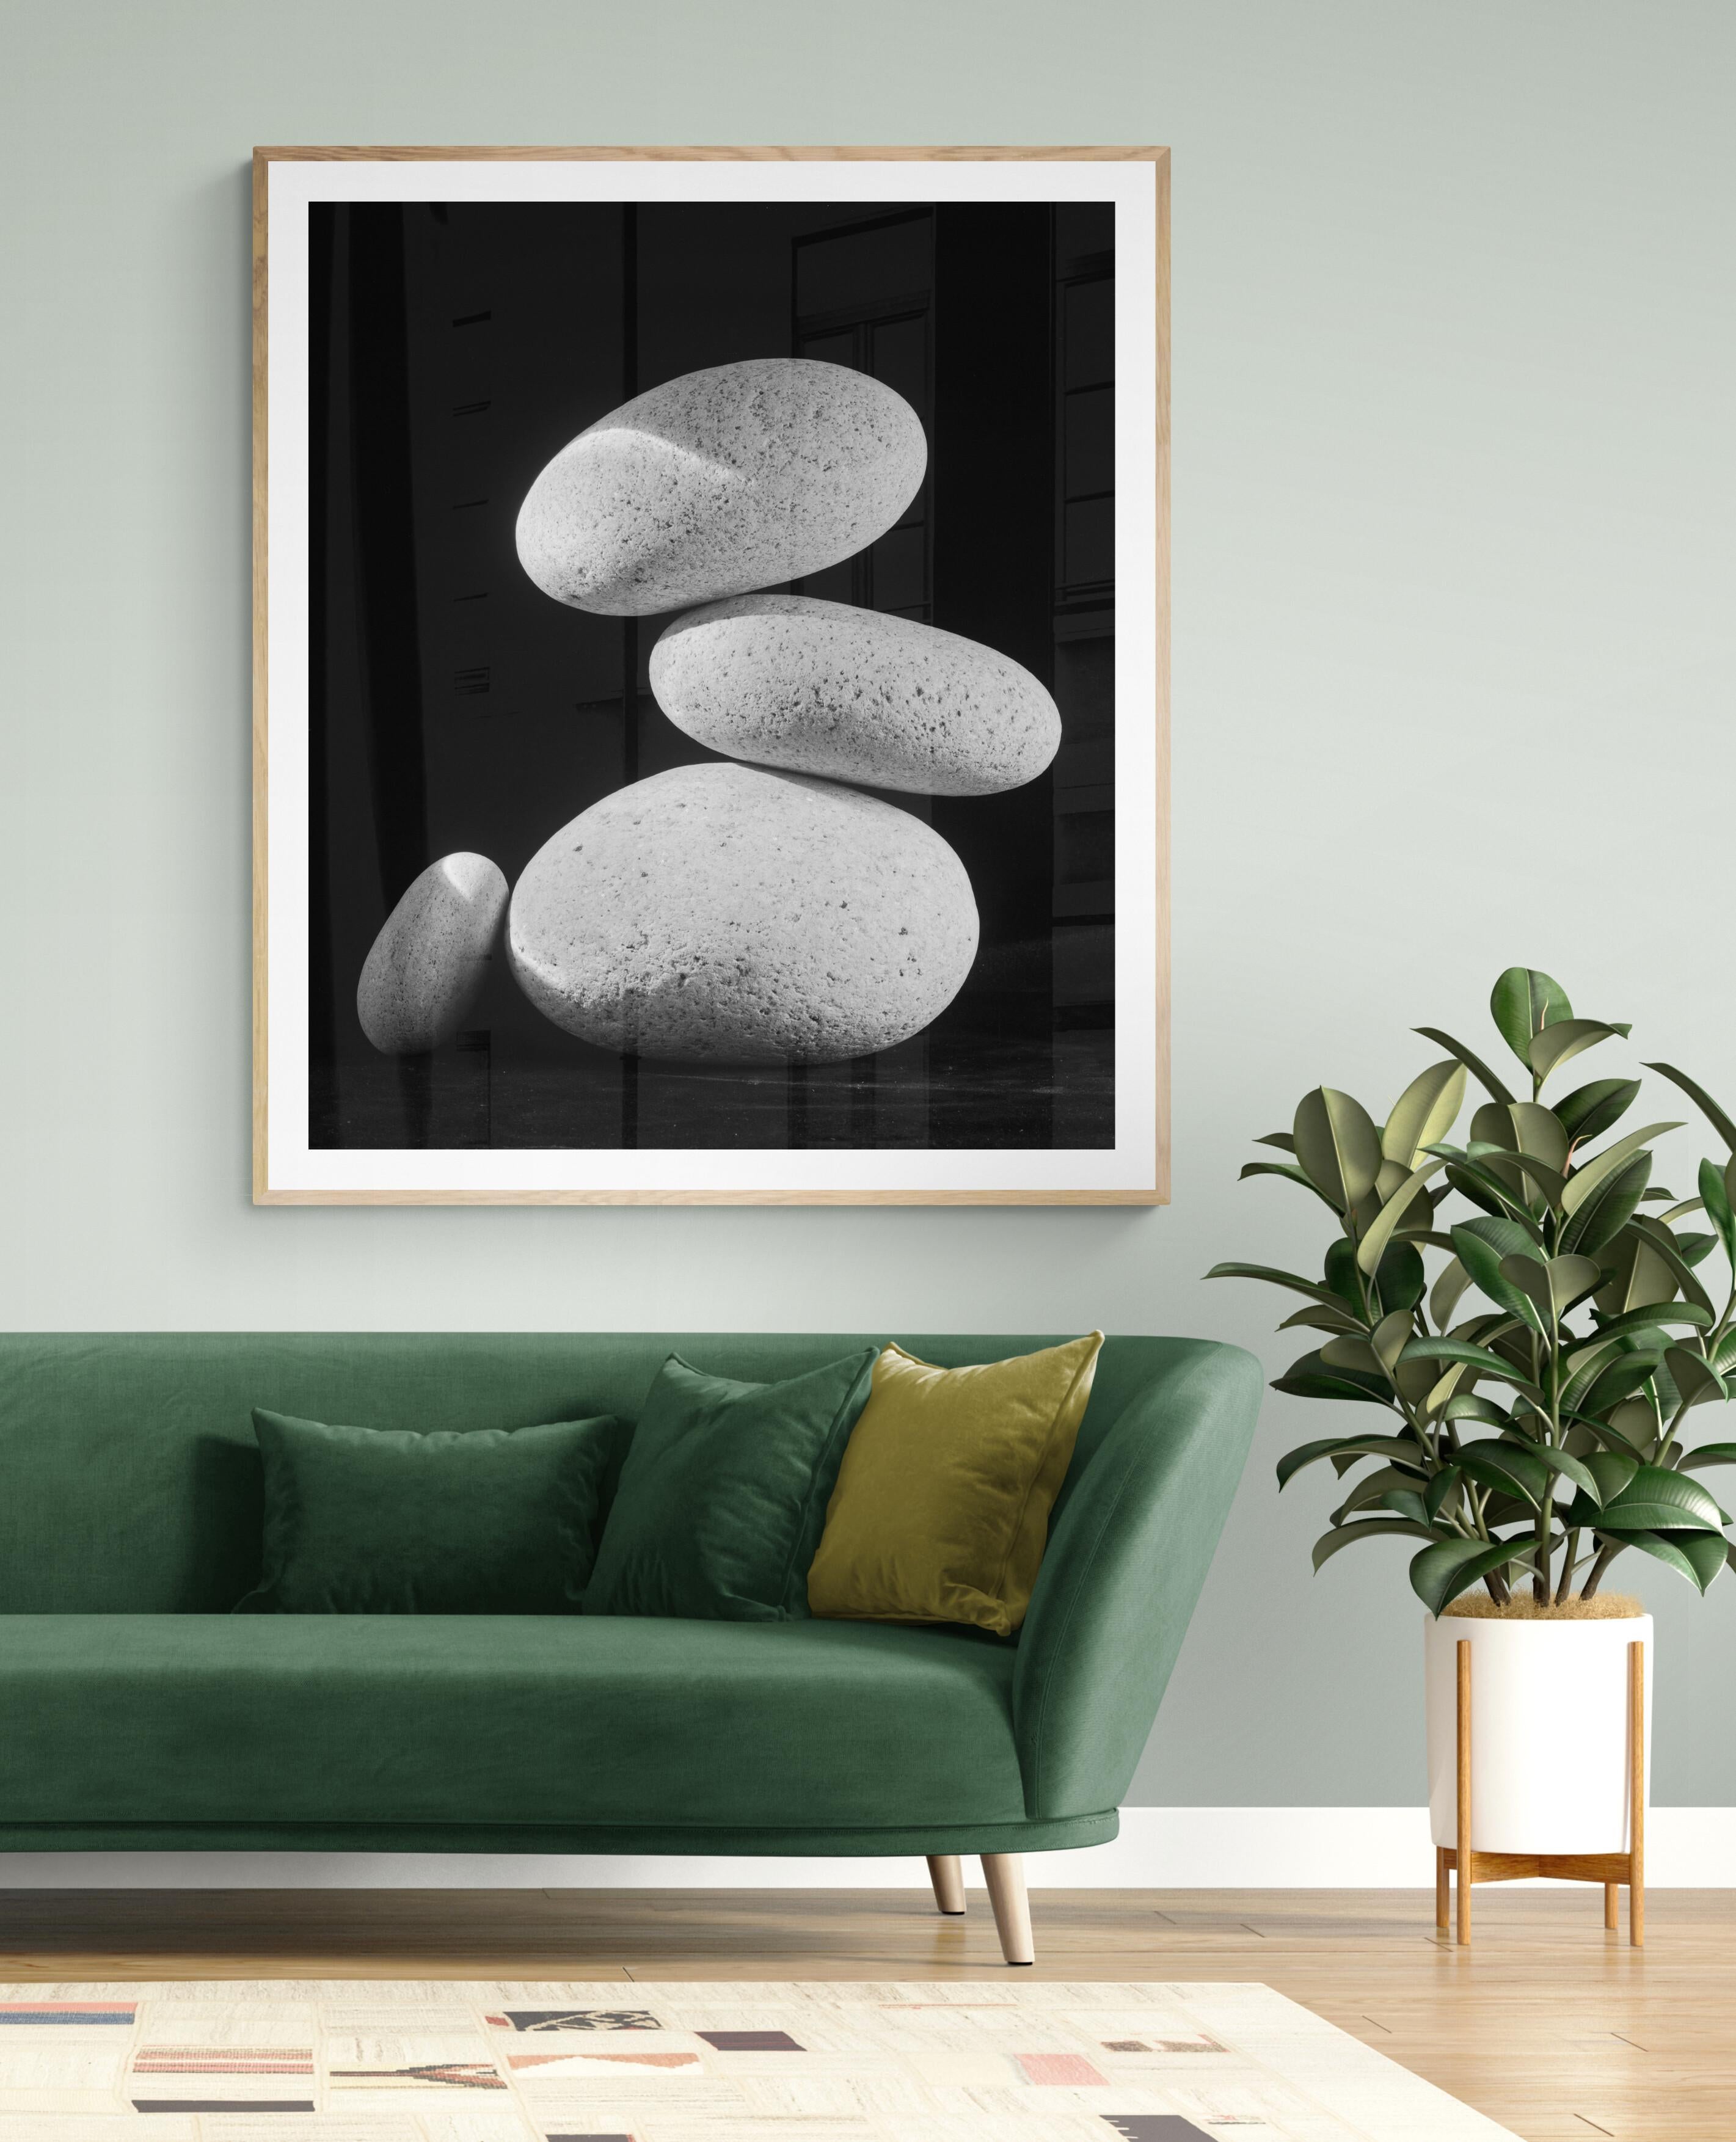  Limited Edition Black and White Photograph Water Stones #15 

I have been intrigued by the phenomenon of stacked stones that can increasingly be found in natural areas frequented by humans. Beyond trail markers, they are stacked for the pleasure of